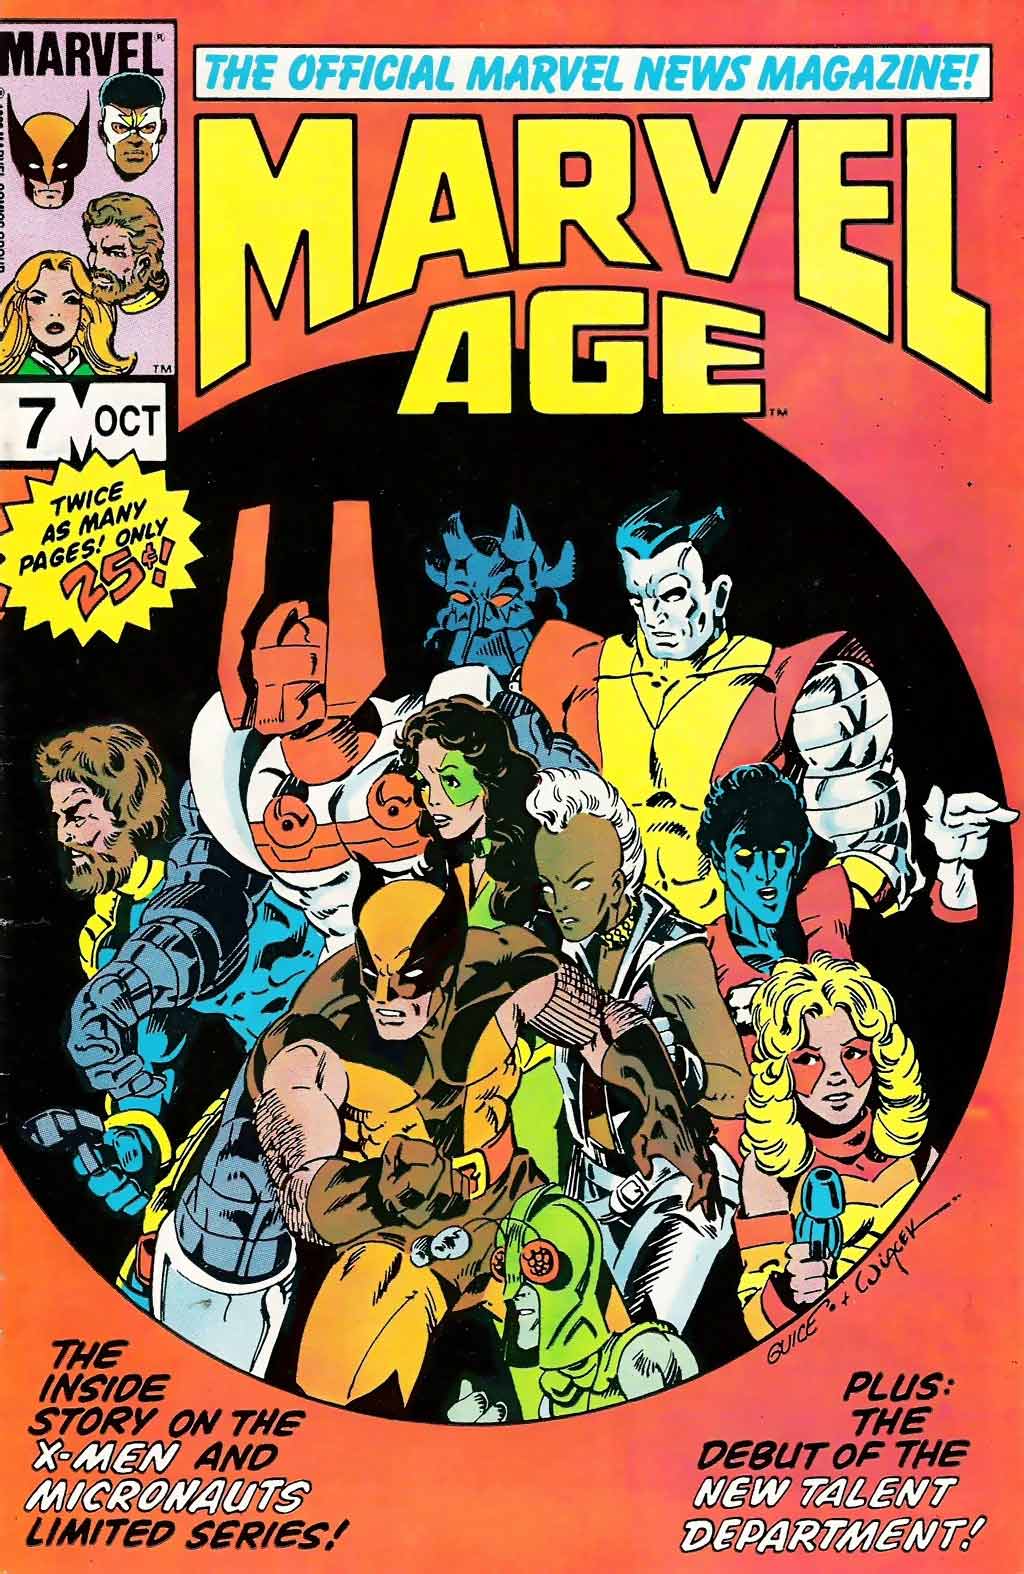 Marvel Age #7 released by Marvel on October 1, 1983